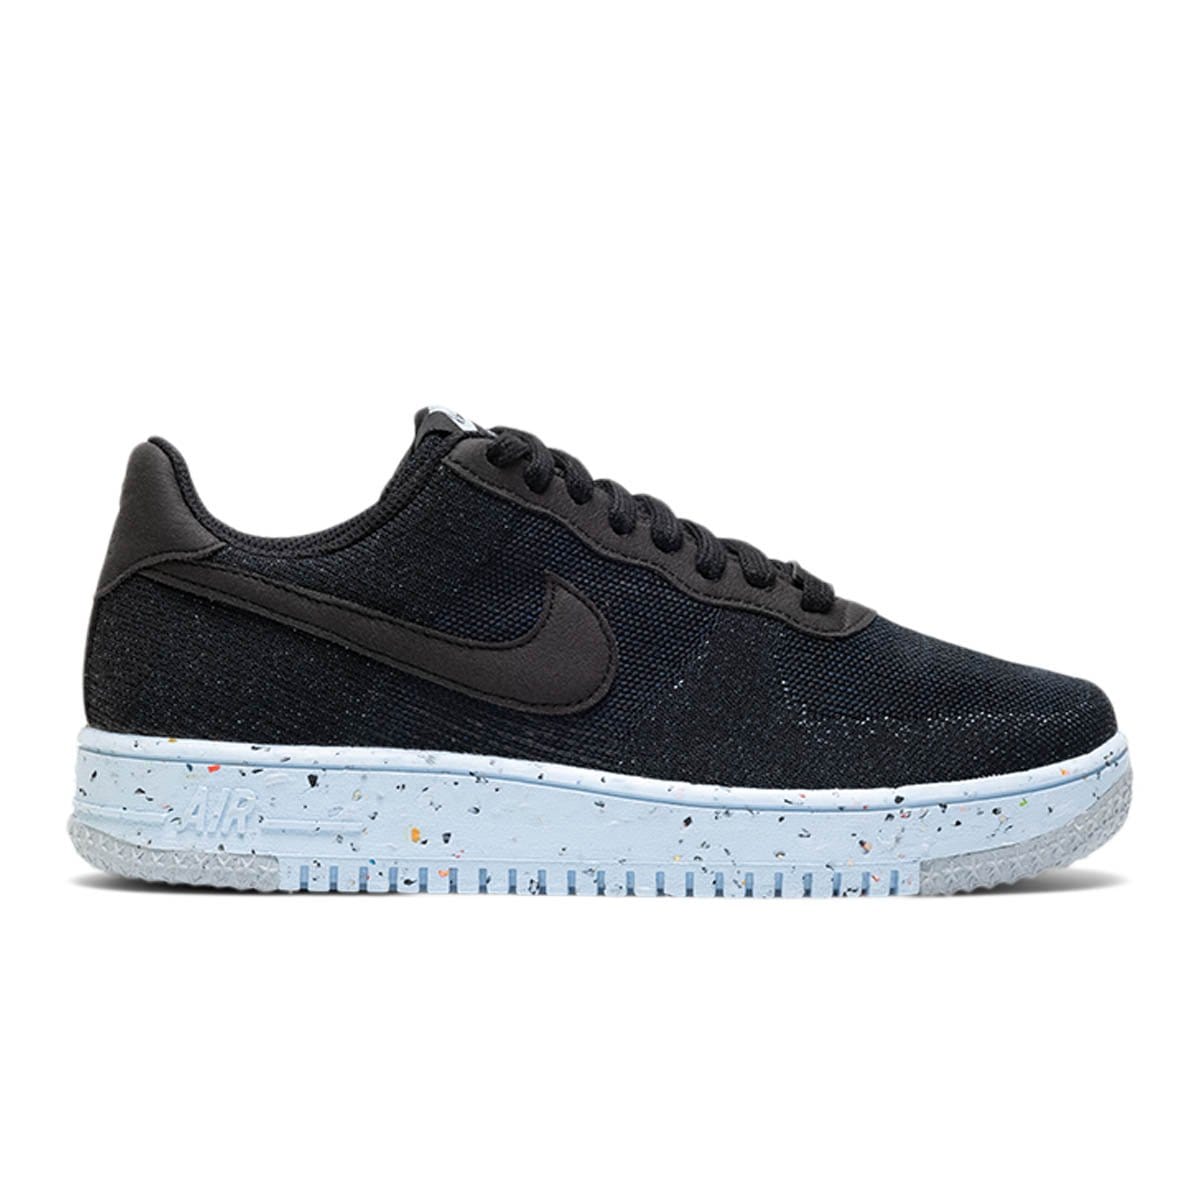 Nike Casual AIR FORCE 1 CRATER FLYKNIT